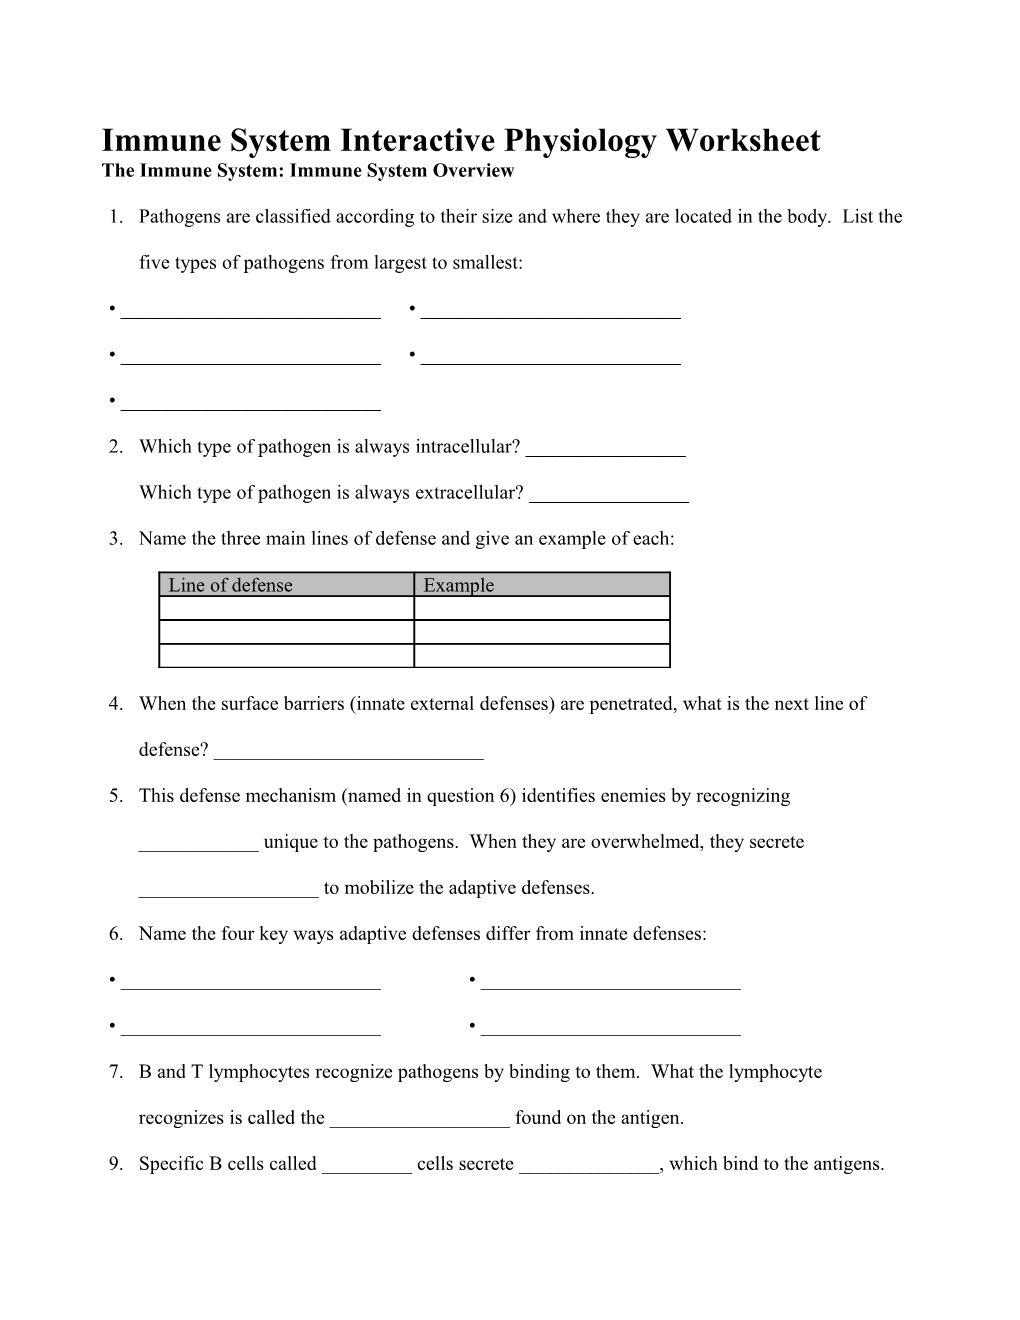 Immune System Interactive Physiology Worksheets